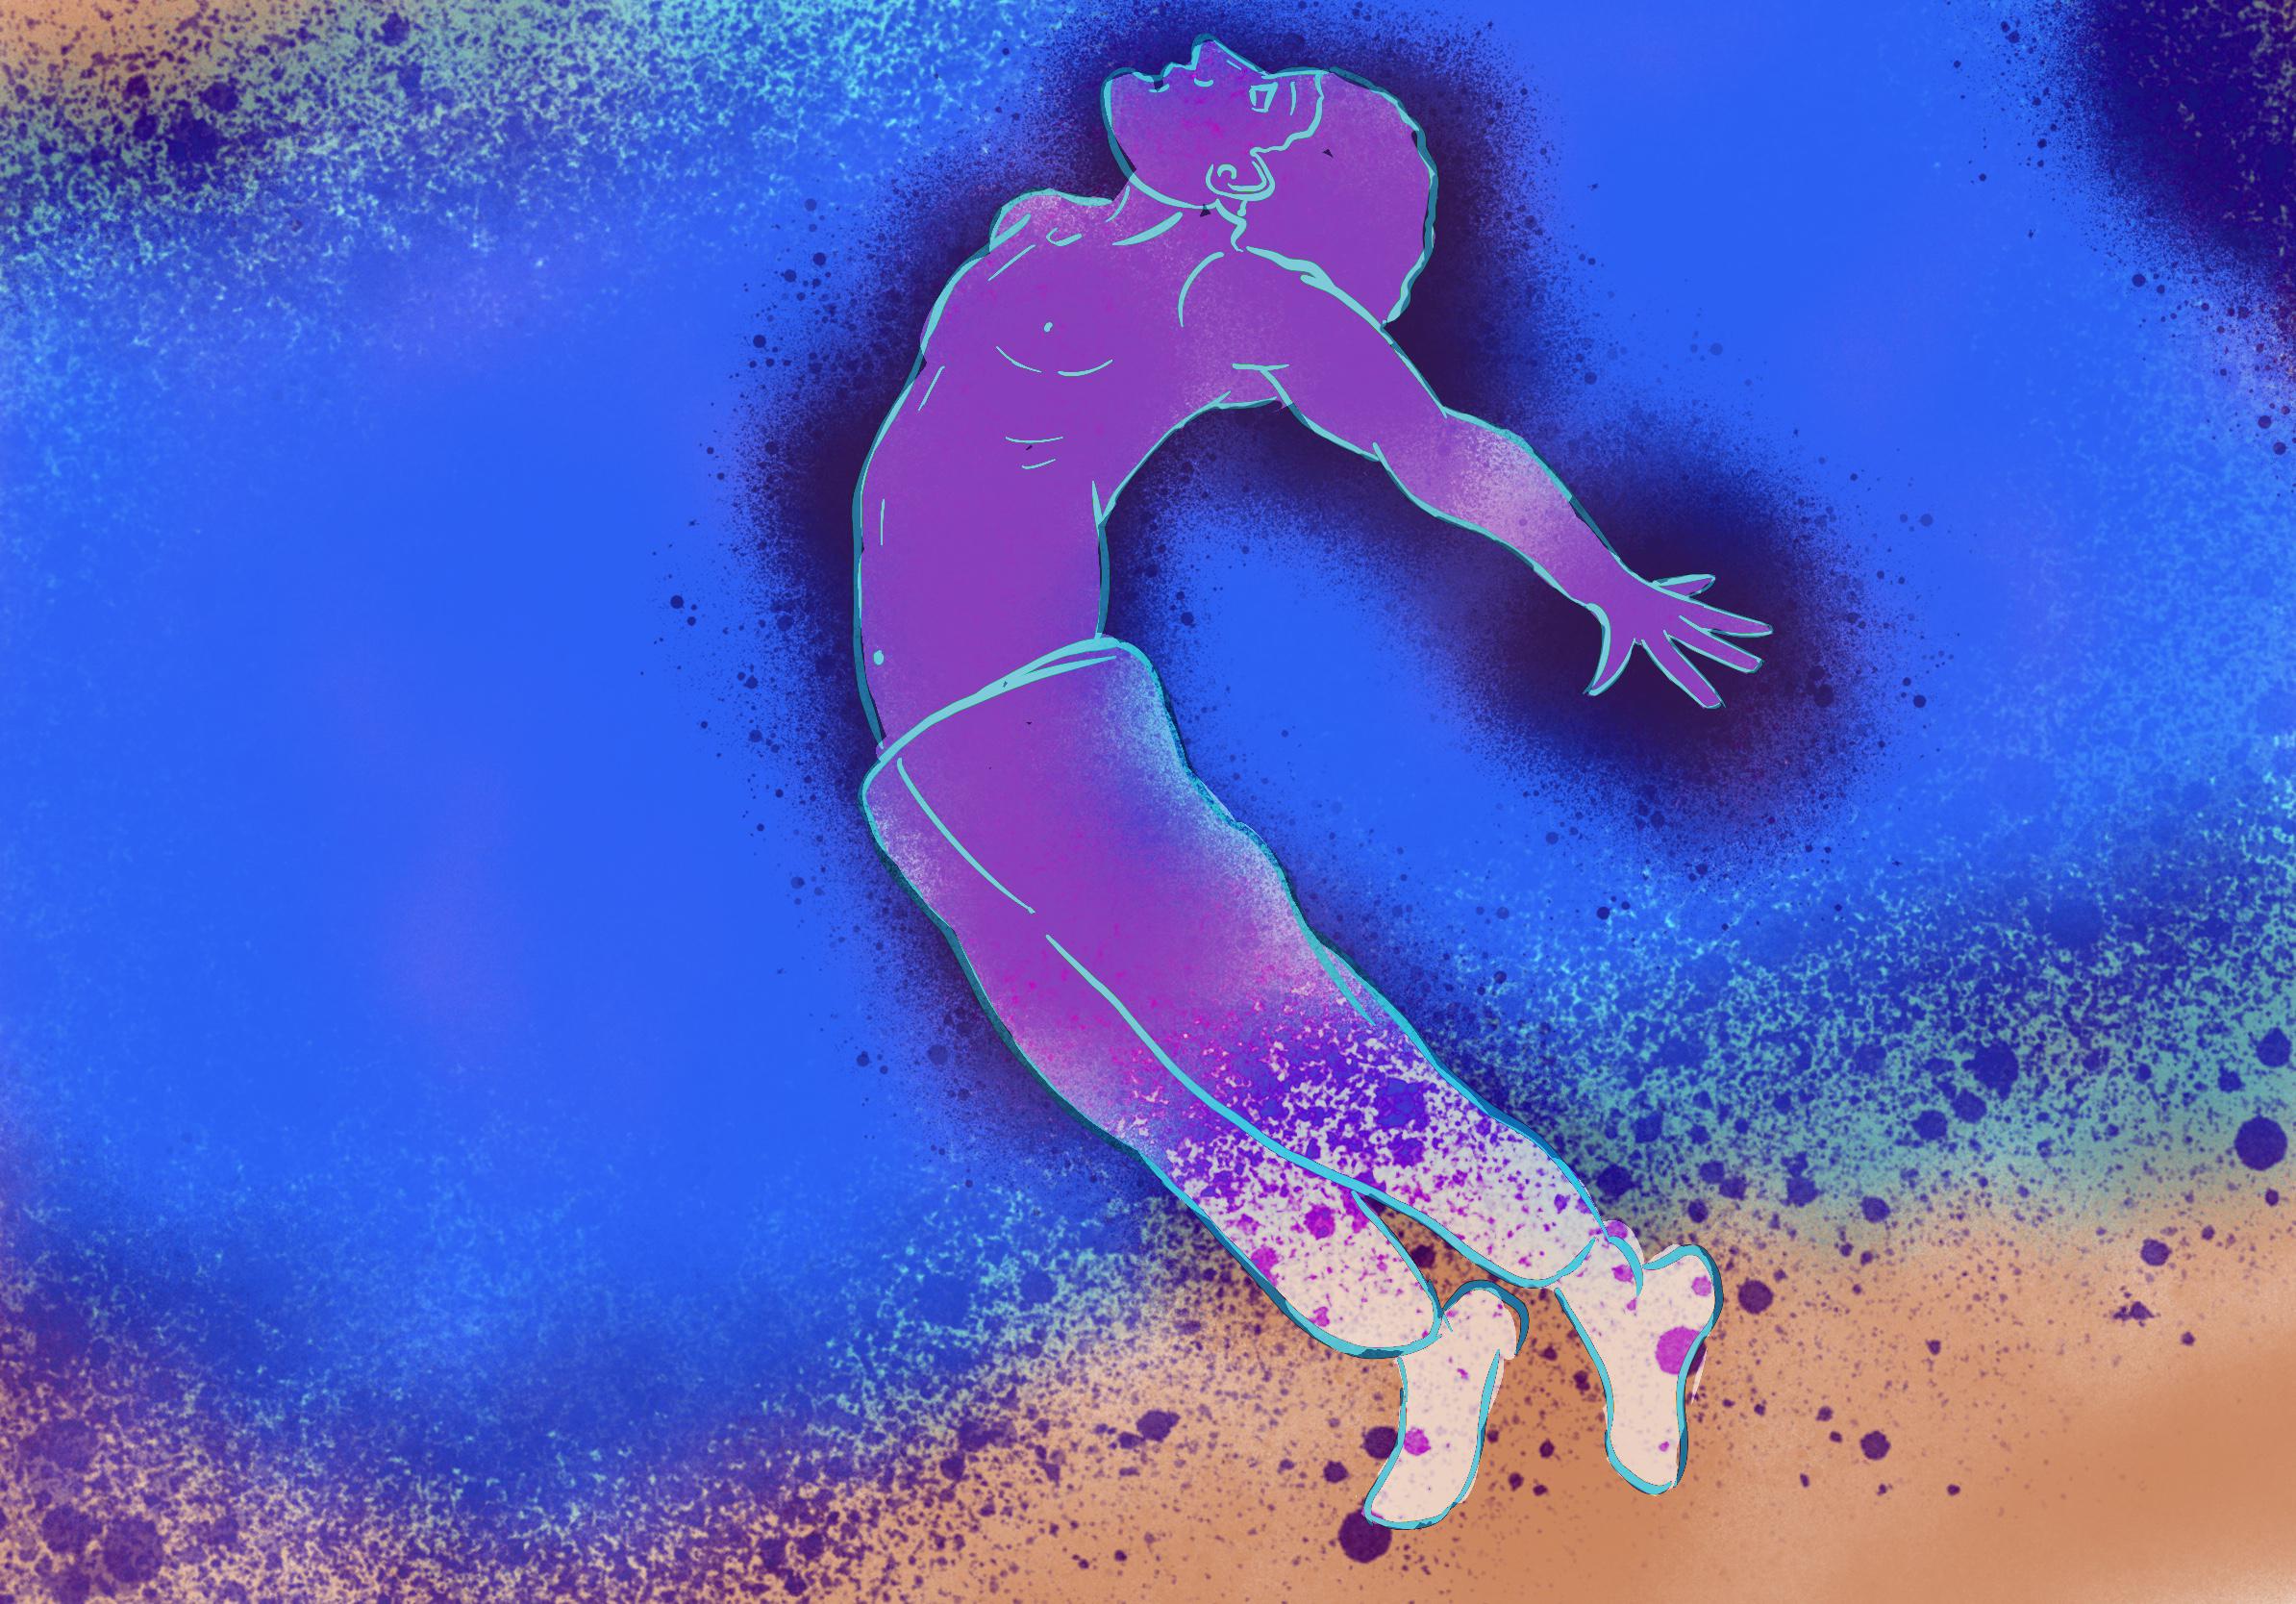 A digital painting of a man jumping by Adam Westbrook